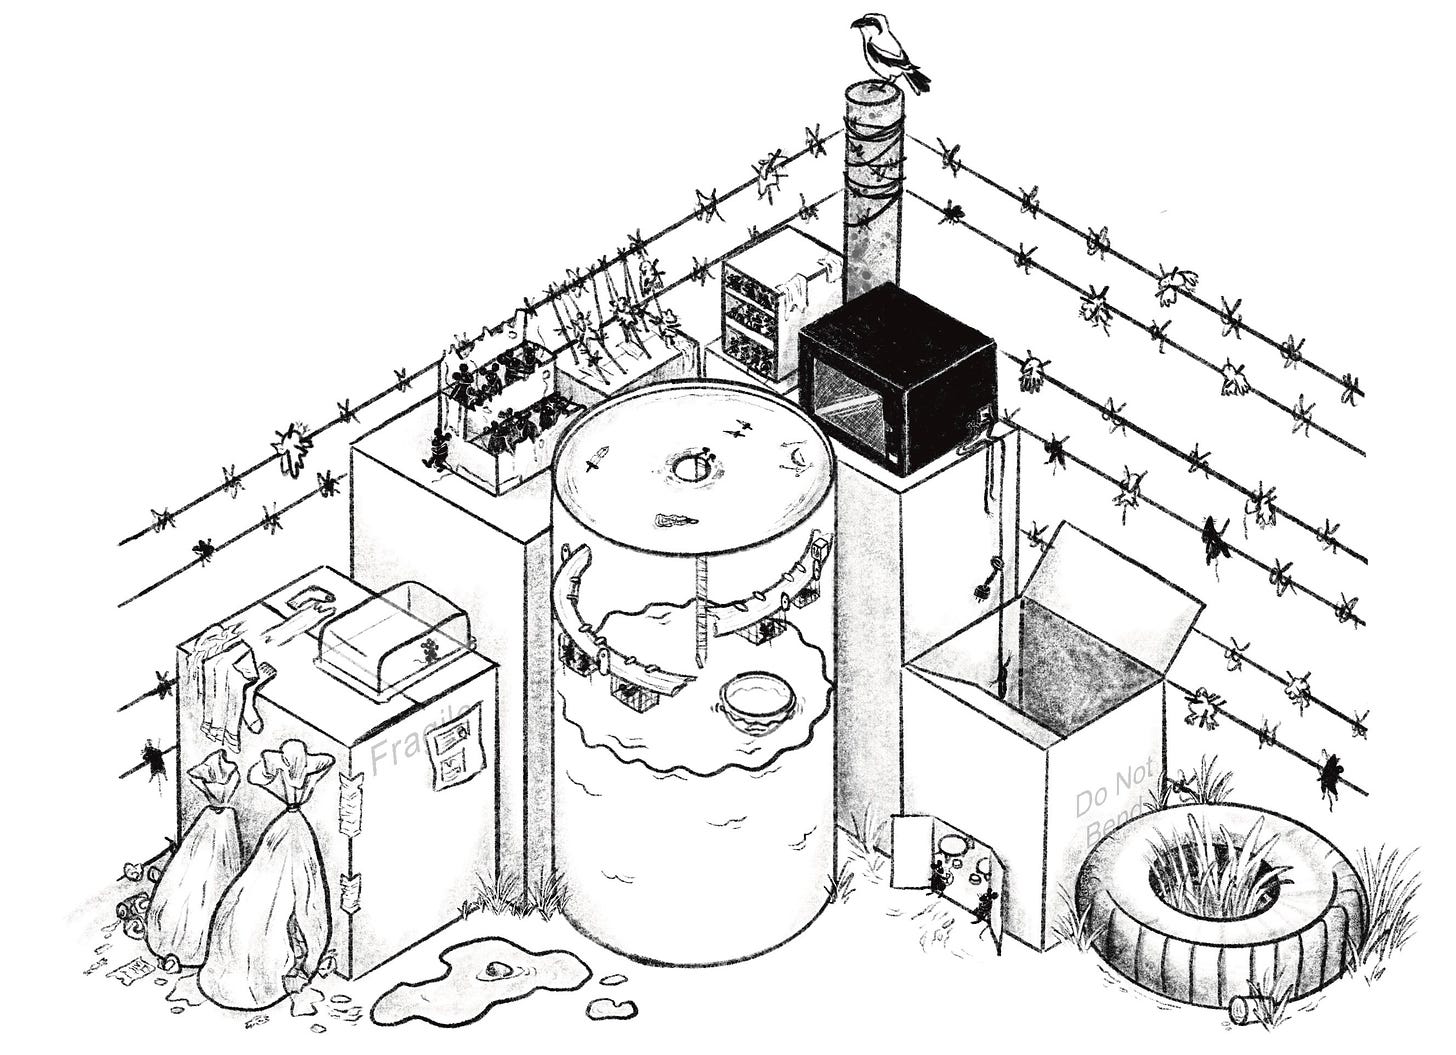 illustrative isometric map of a corner of a junkyard. it includes a large oil barrel that has been turned into a gladiatorial arena, surrounded by cardboard box stands full of rats. To the left is a mouse trapped in a tupperware box, and some overflowing rubbish bags. to the right is a cardboard box being used as a restaurant and casino. To the far right is a car tire filled with overgrowing grass. the entire junkyard is enclosed by a barbed wire fence which has various small birds and mice impaled on it. On the fence post sits a shrike, a bird of prey which surveys the junked for her next prey.